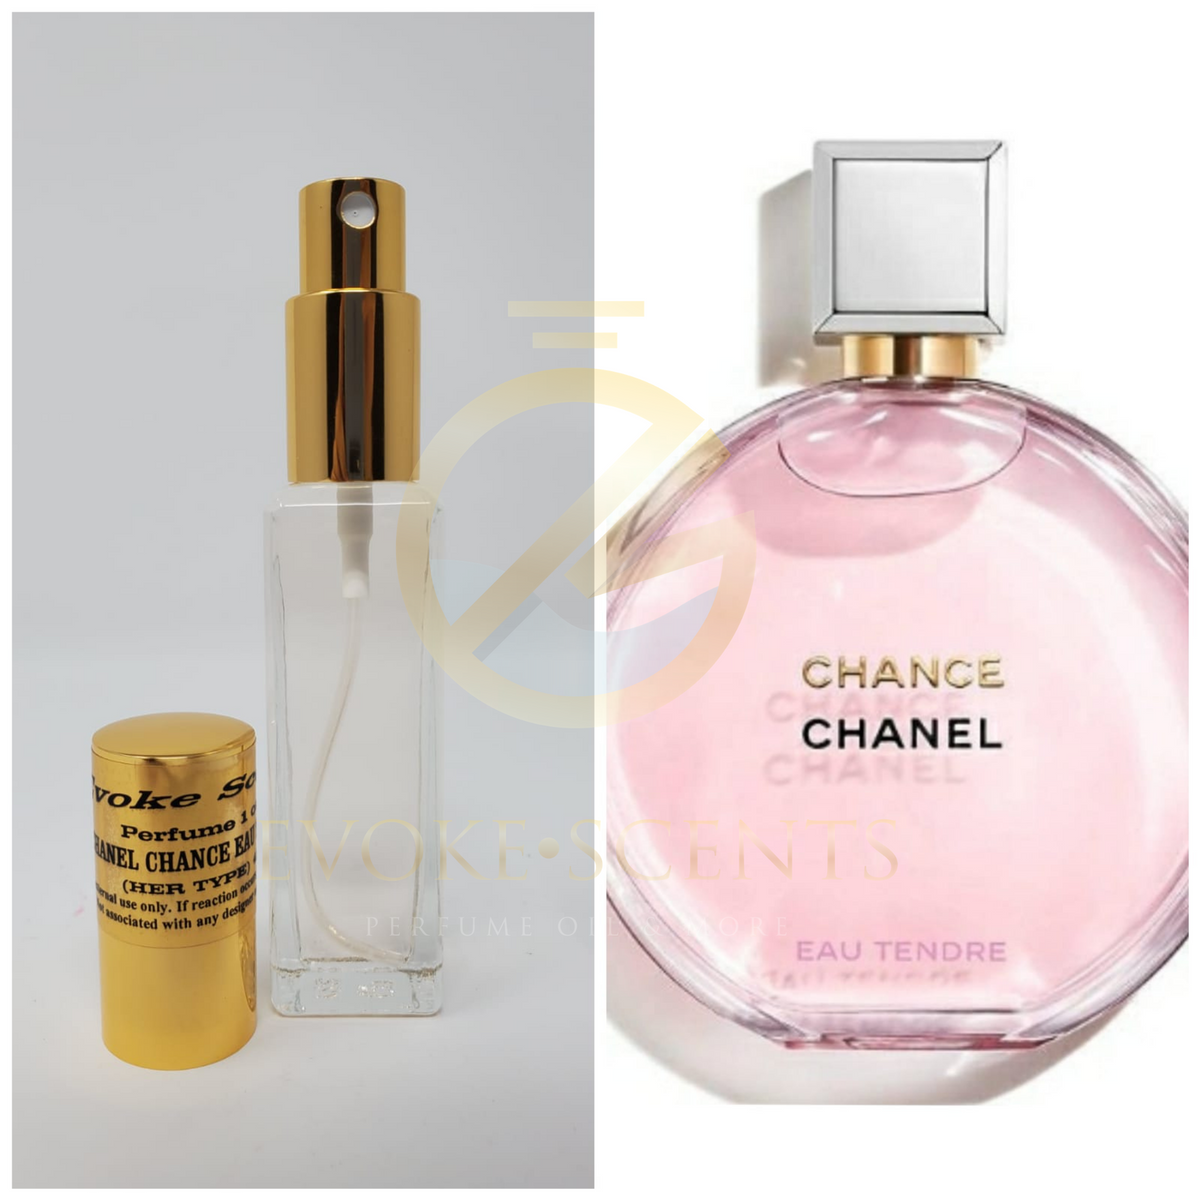 CHANCE EAU TENDRE BY CHANEL TYPE : FRAGRANCE (PERFUME) BODY OIL –  Back2Africa